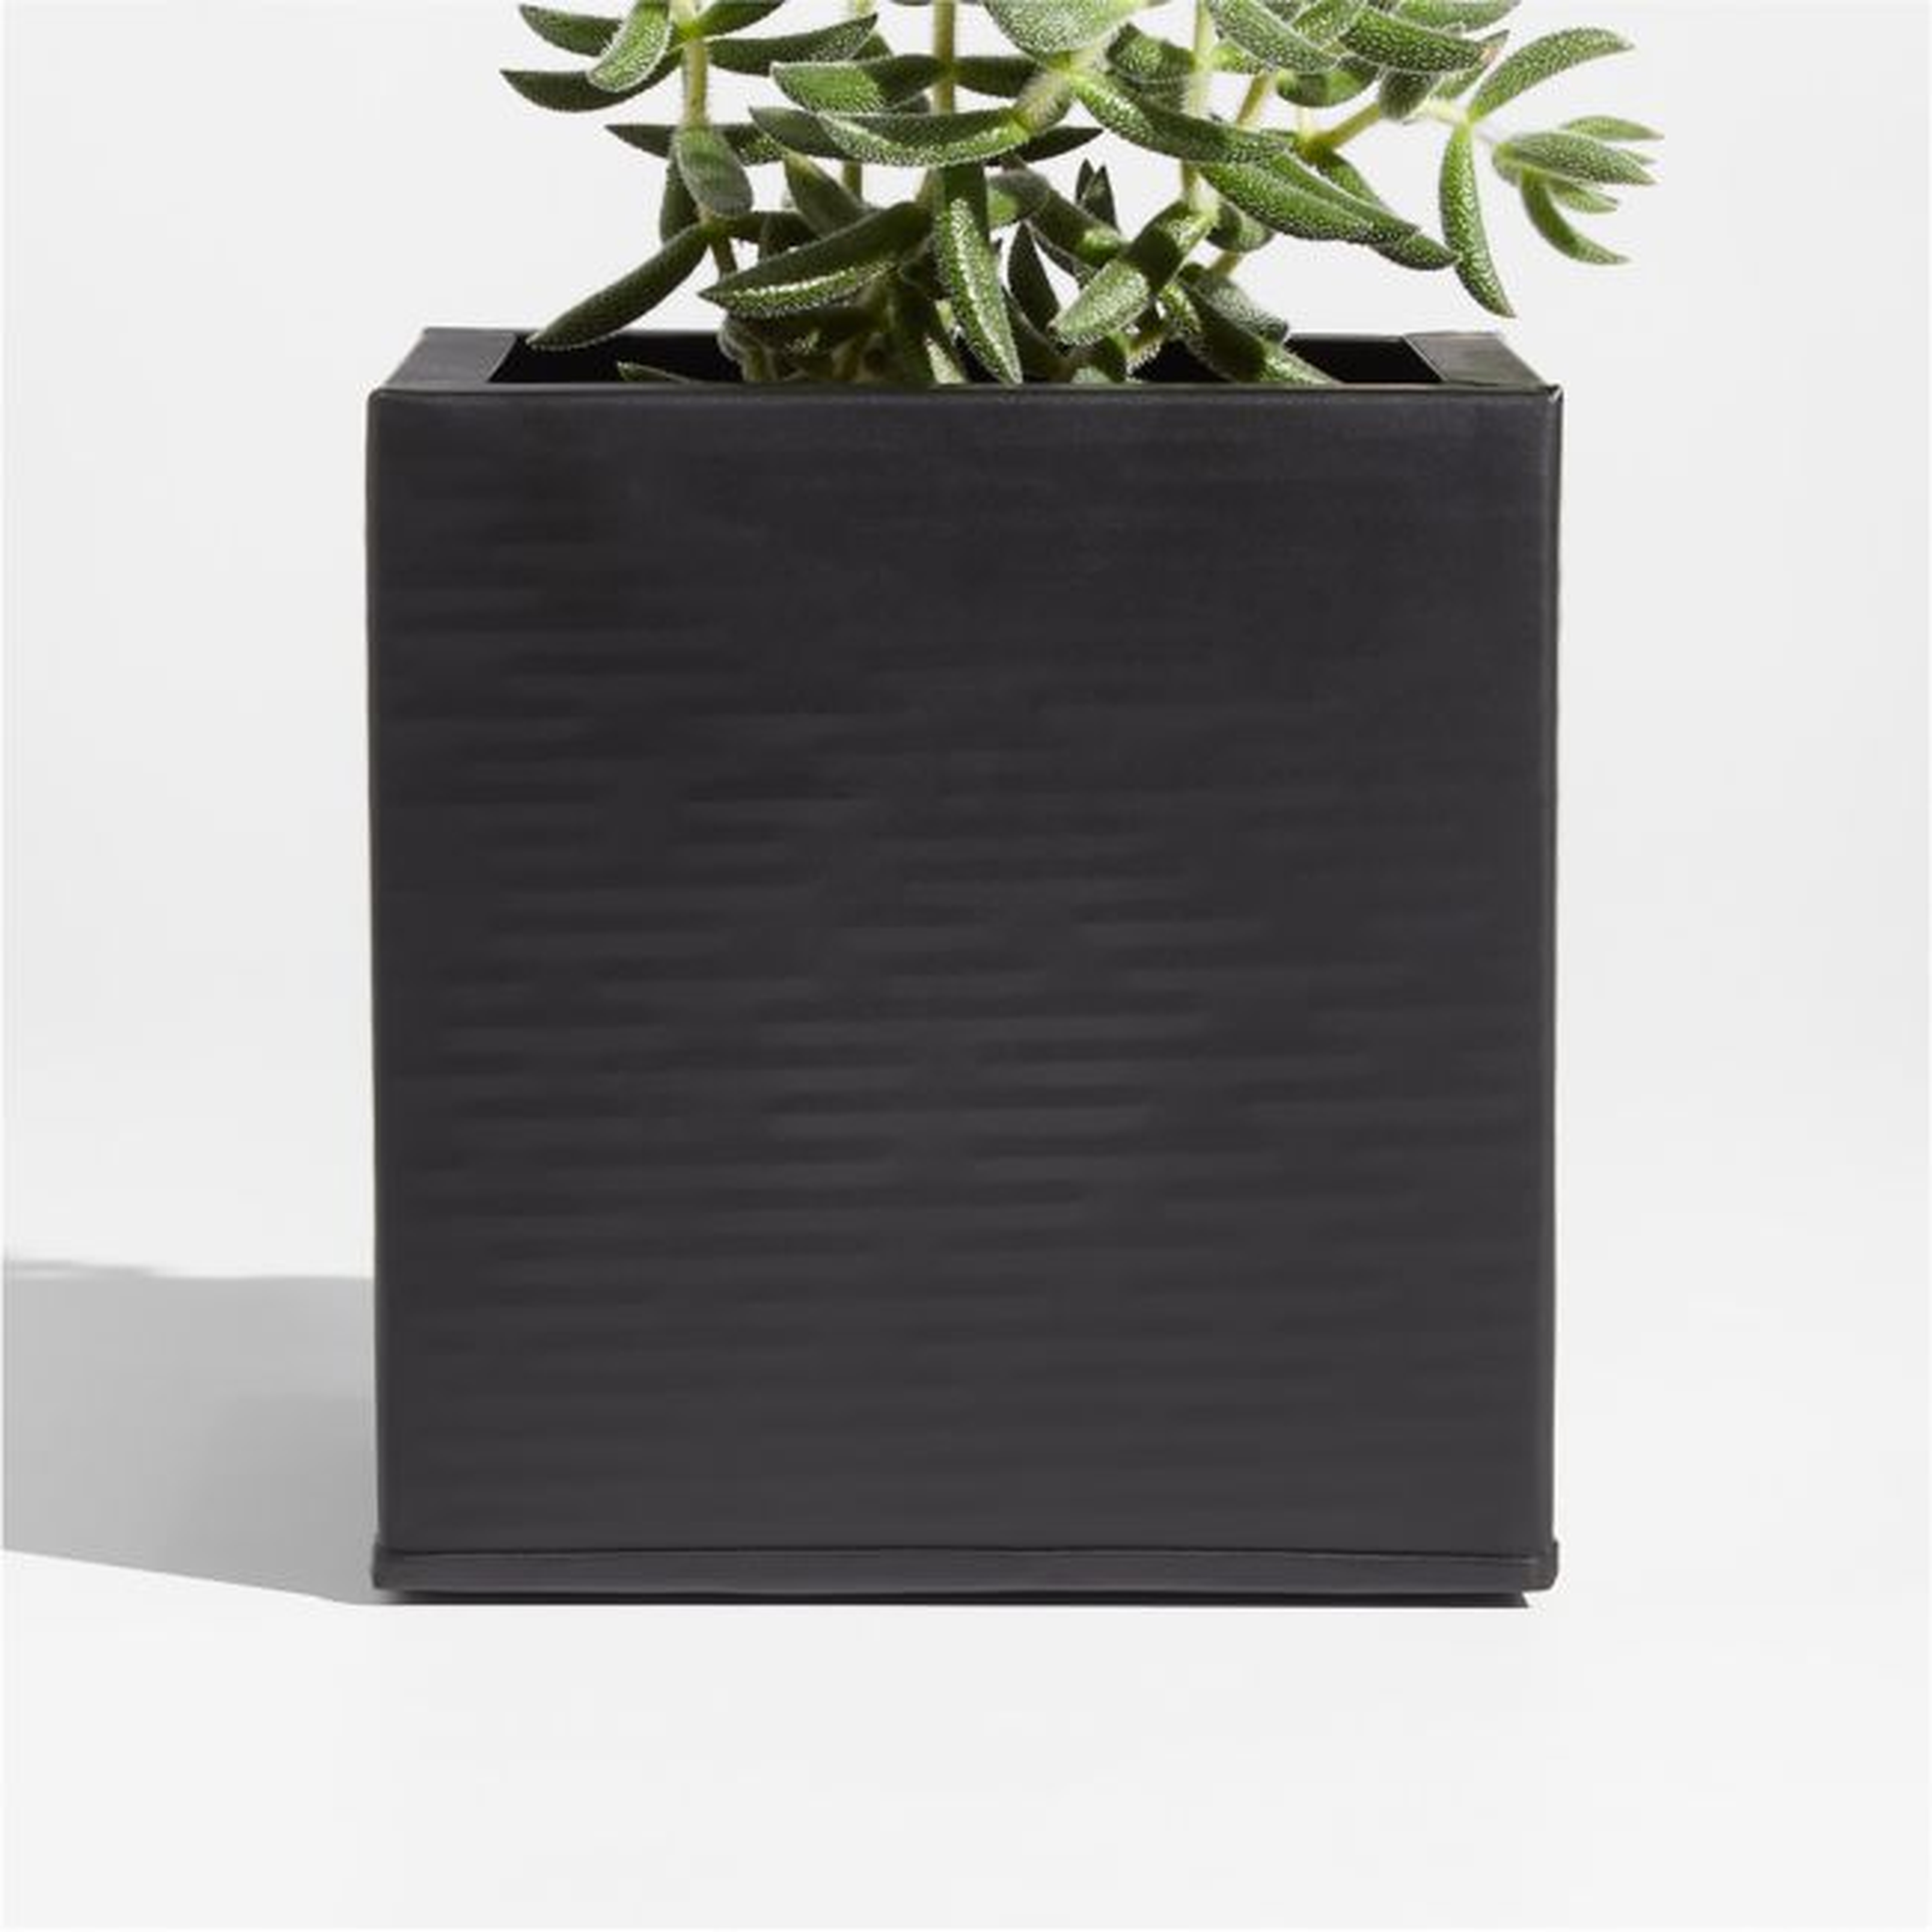 Black Planter Box for Wall Mounted Indoor/Outdoor Planter - Crate and Barrel